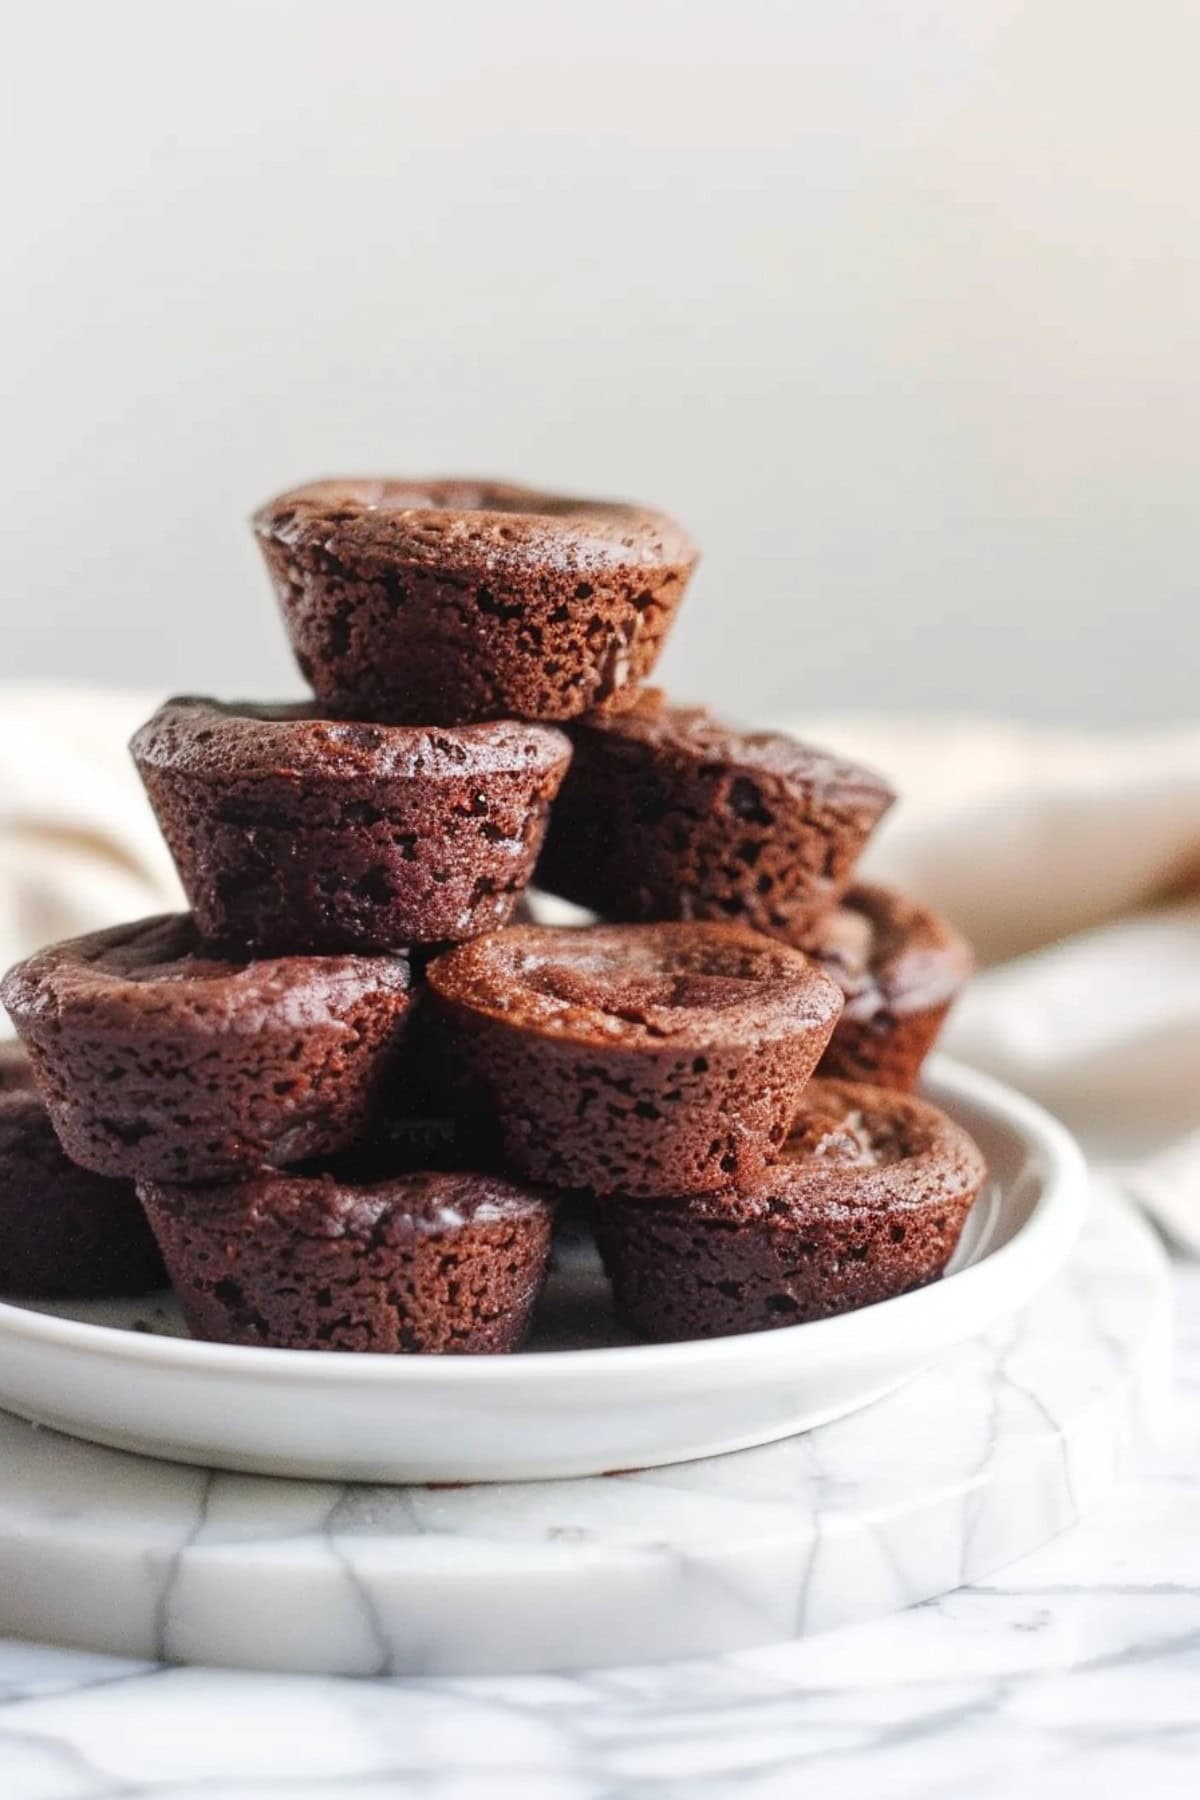 A stack of brownie bites on a white plate, showcasing their moist and chewy texture